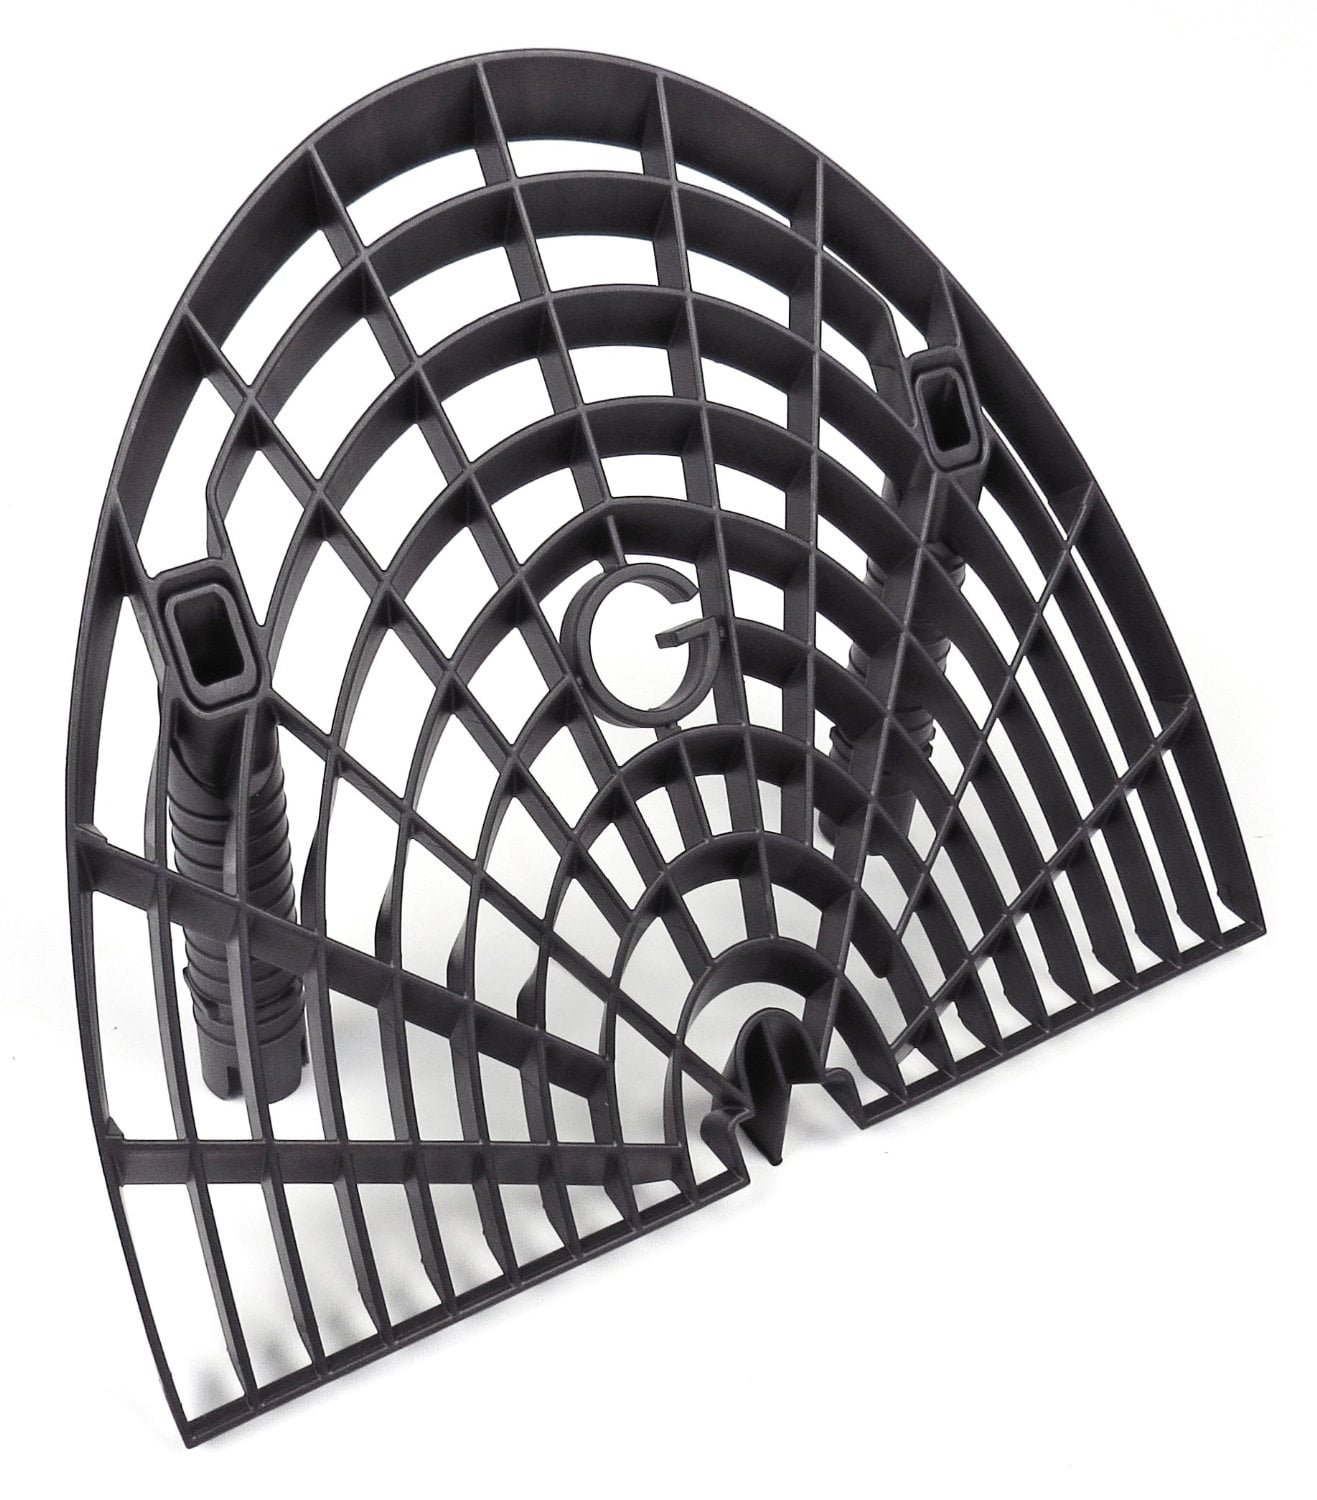 Grit Guard GGWB-BLK Washboard Bucket Insert - Attaches to Grit Guard ...